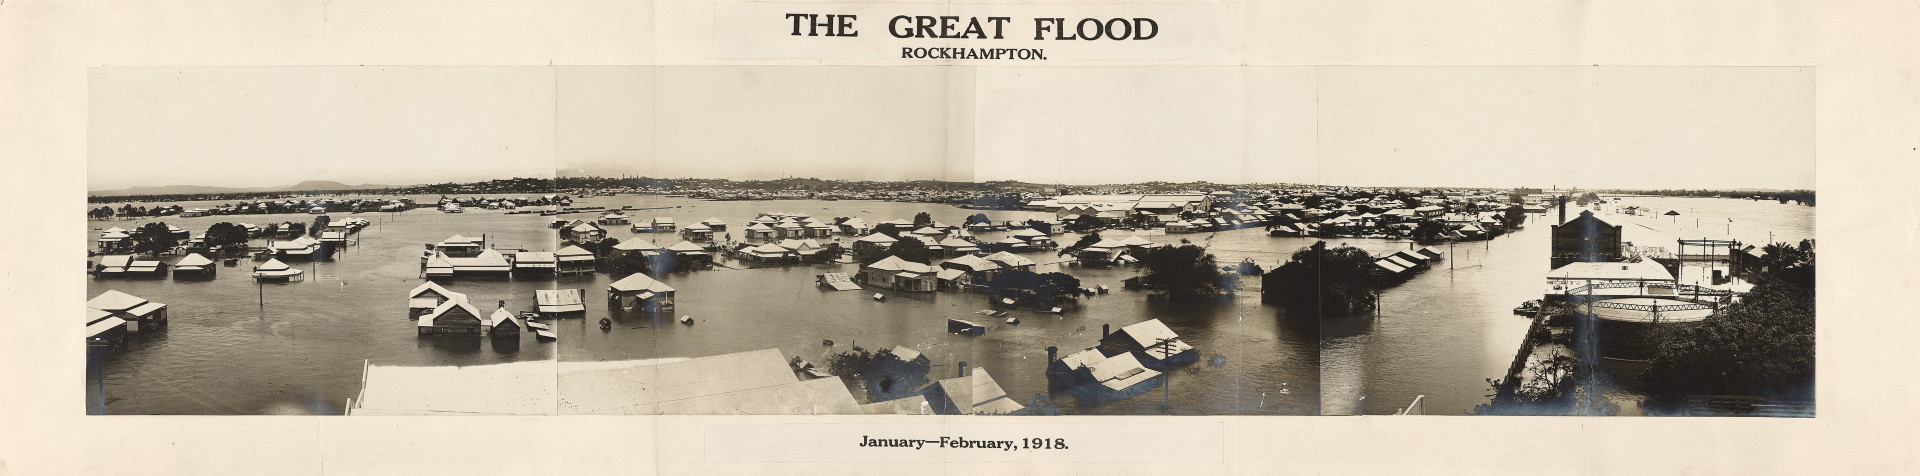 A panorama showing The Great Flood in Rockhampton in 1918. 